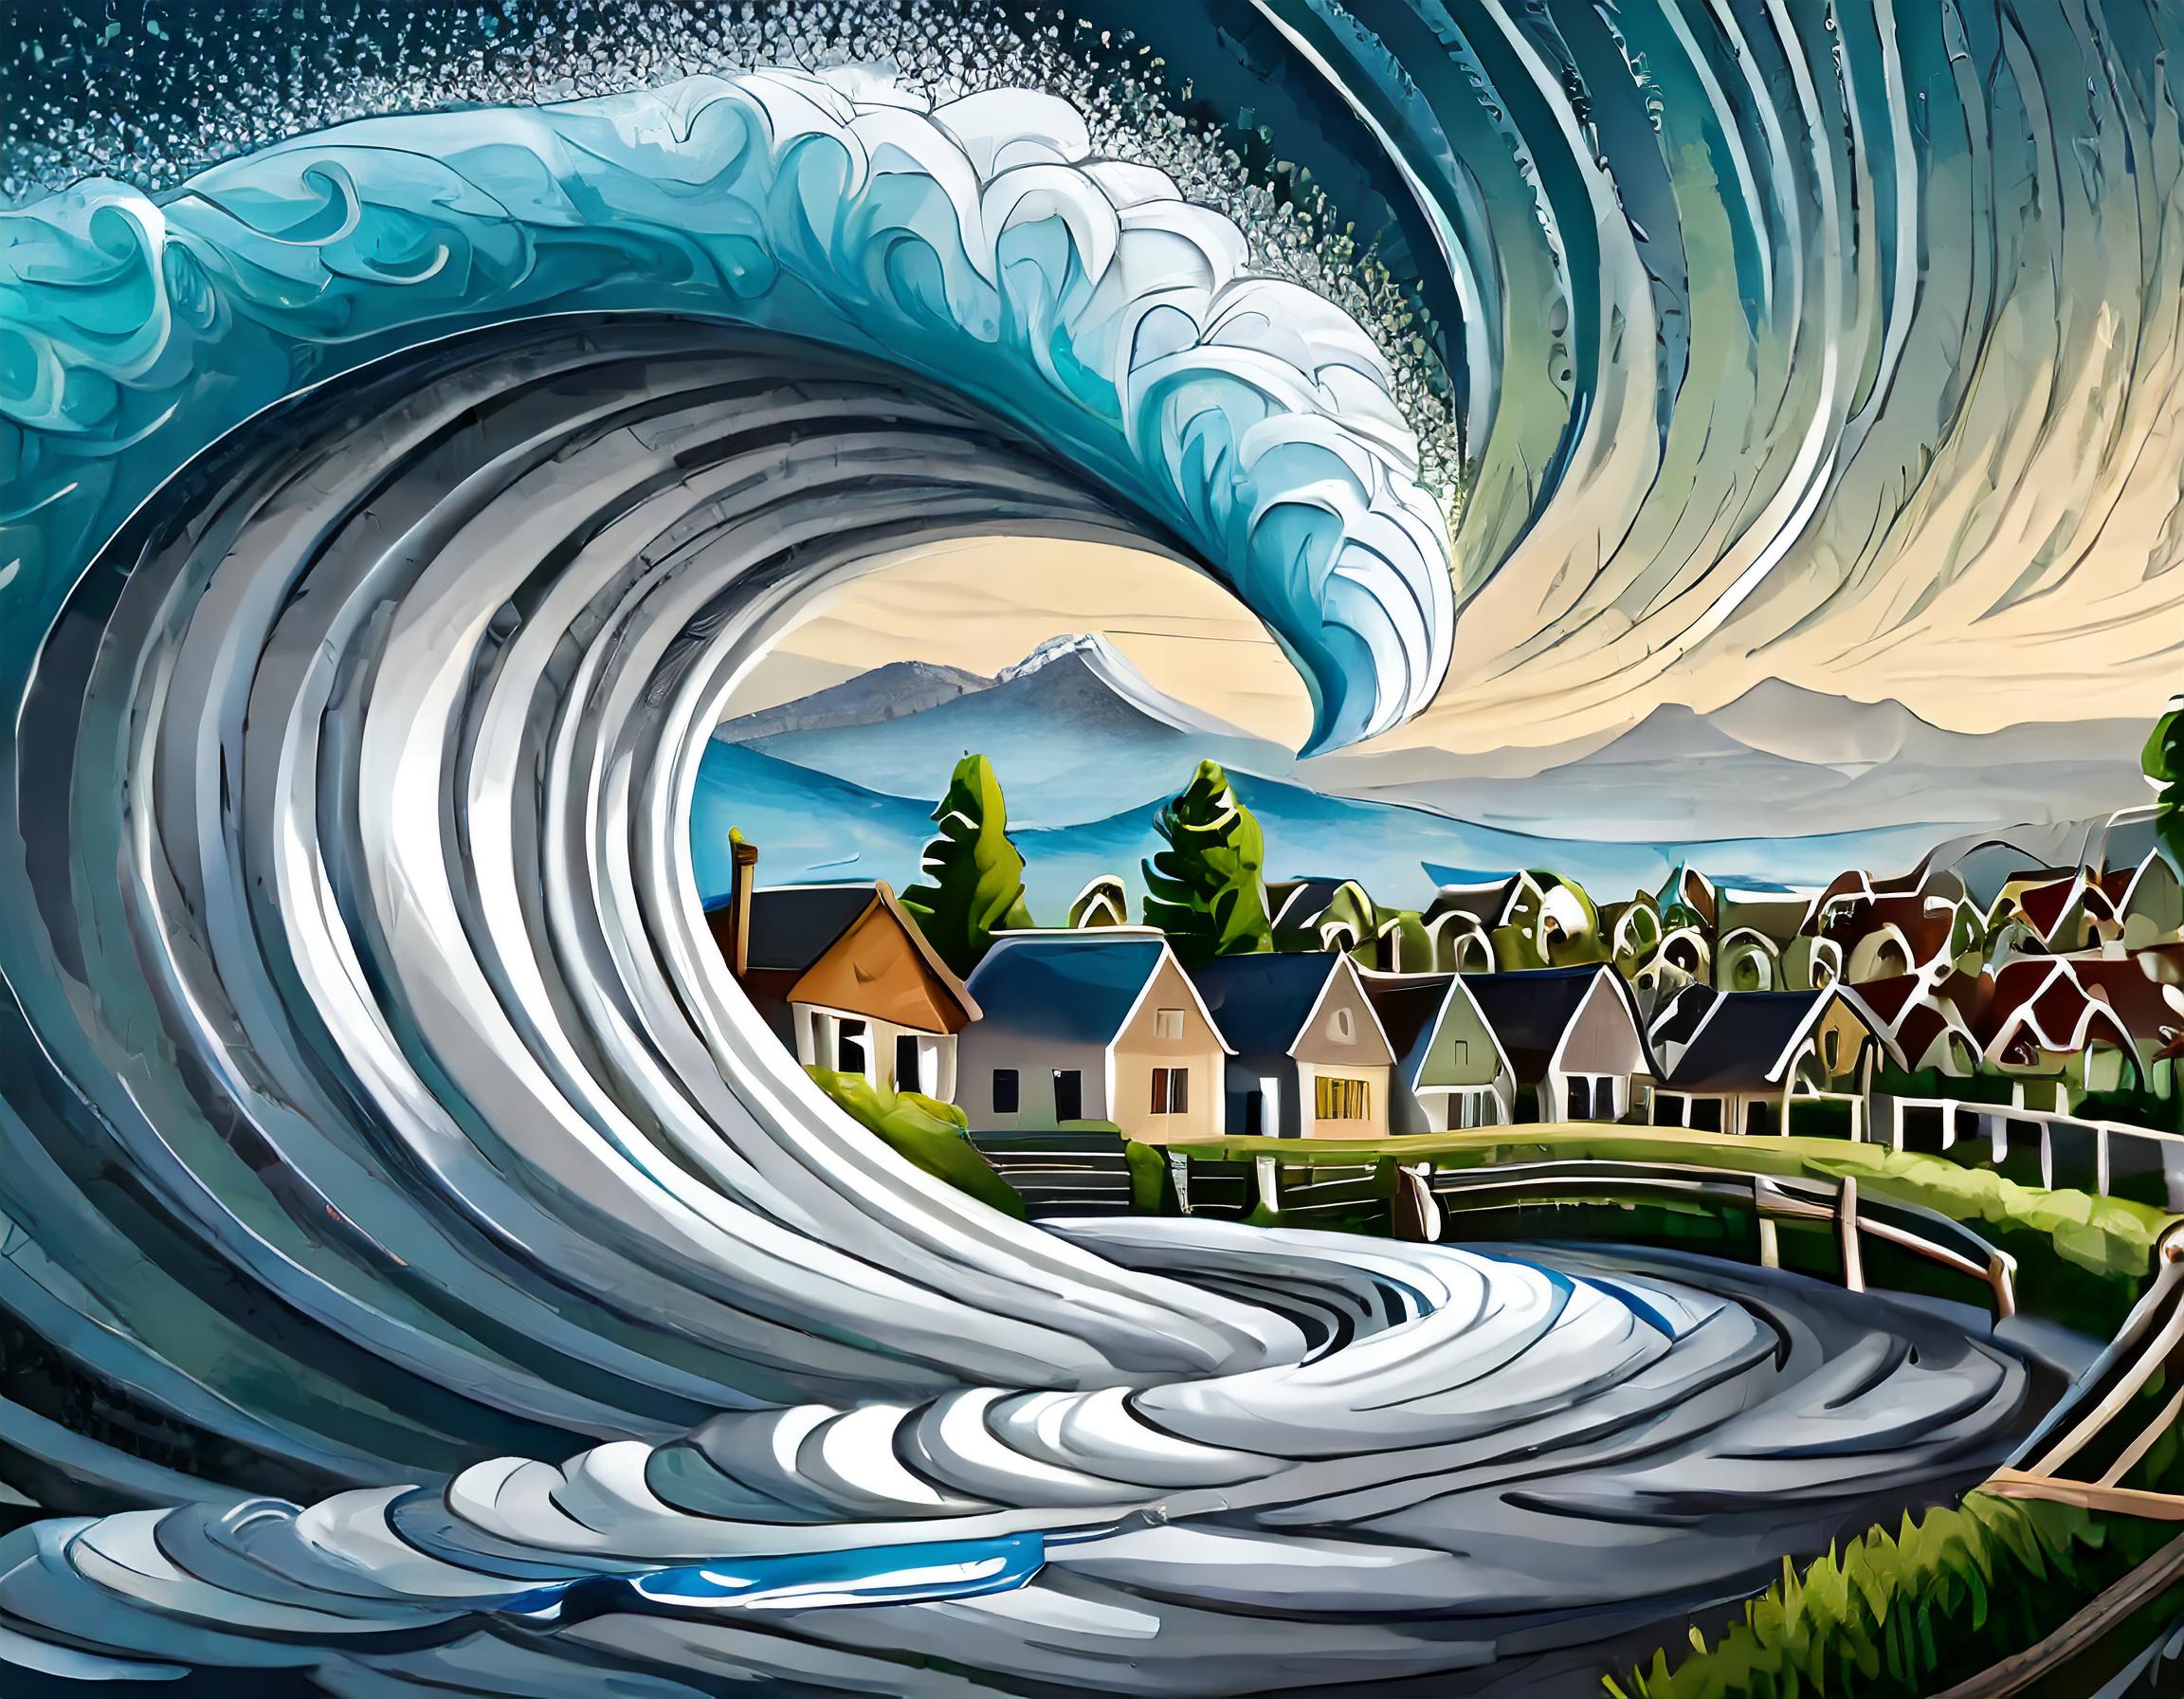 The Senior Tsunami of the Real Estate Market - An image depicting a large silver wave ready to wash over a housing development